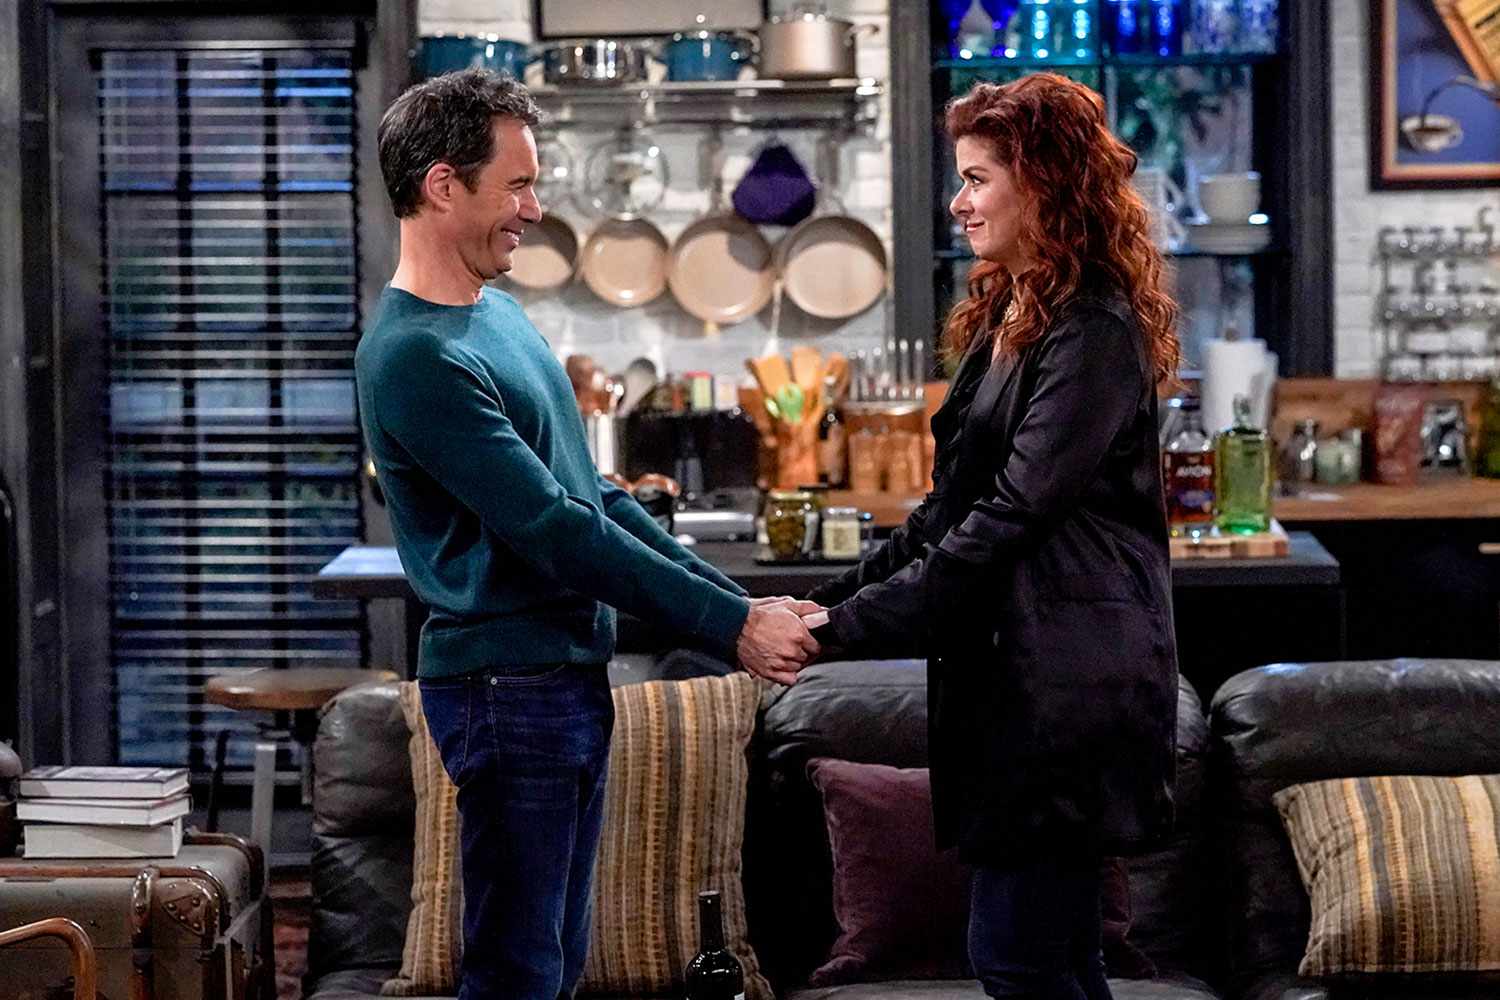 WILL and GRACE